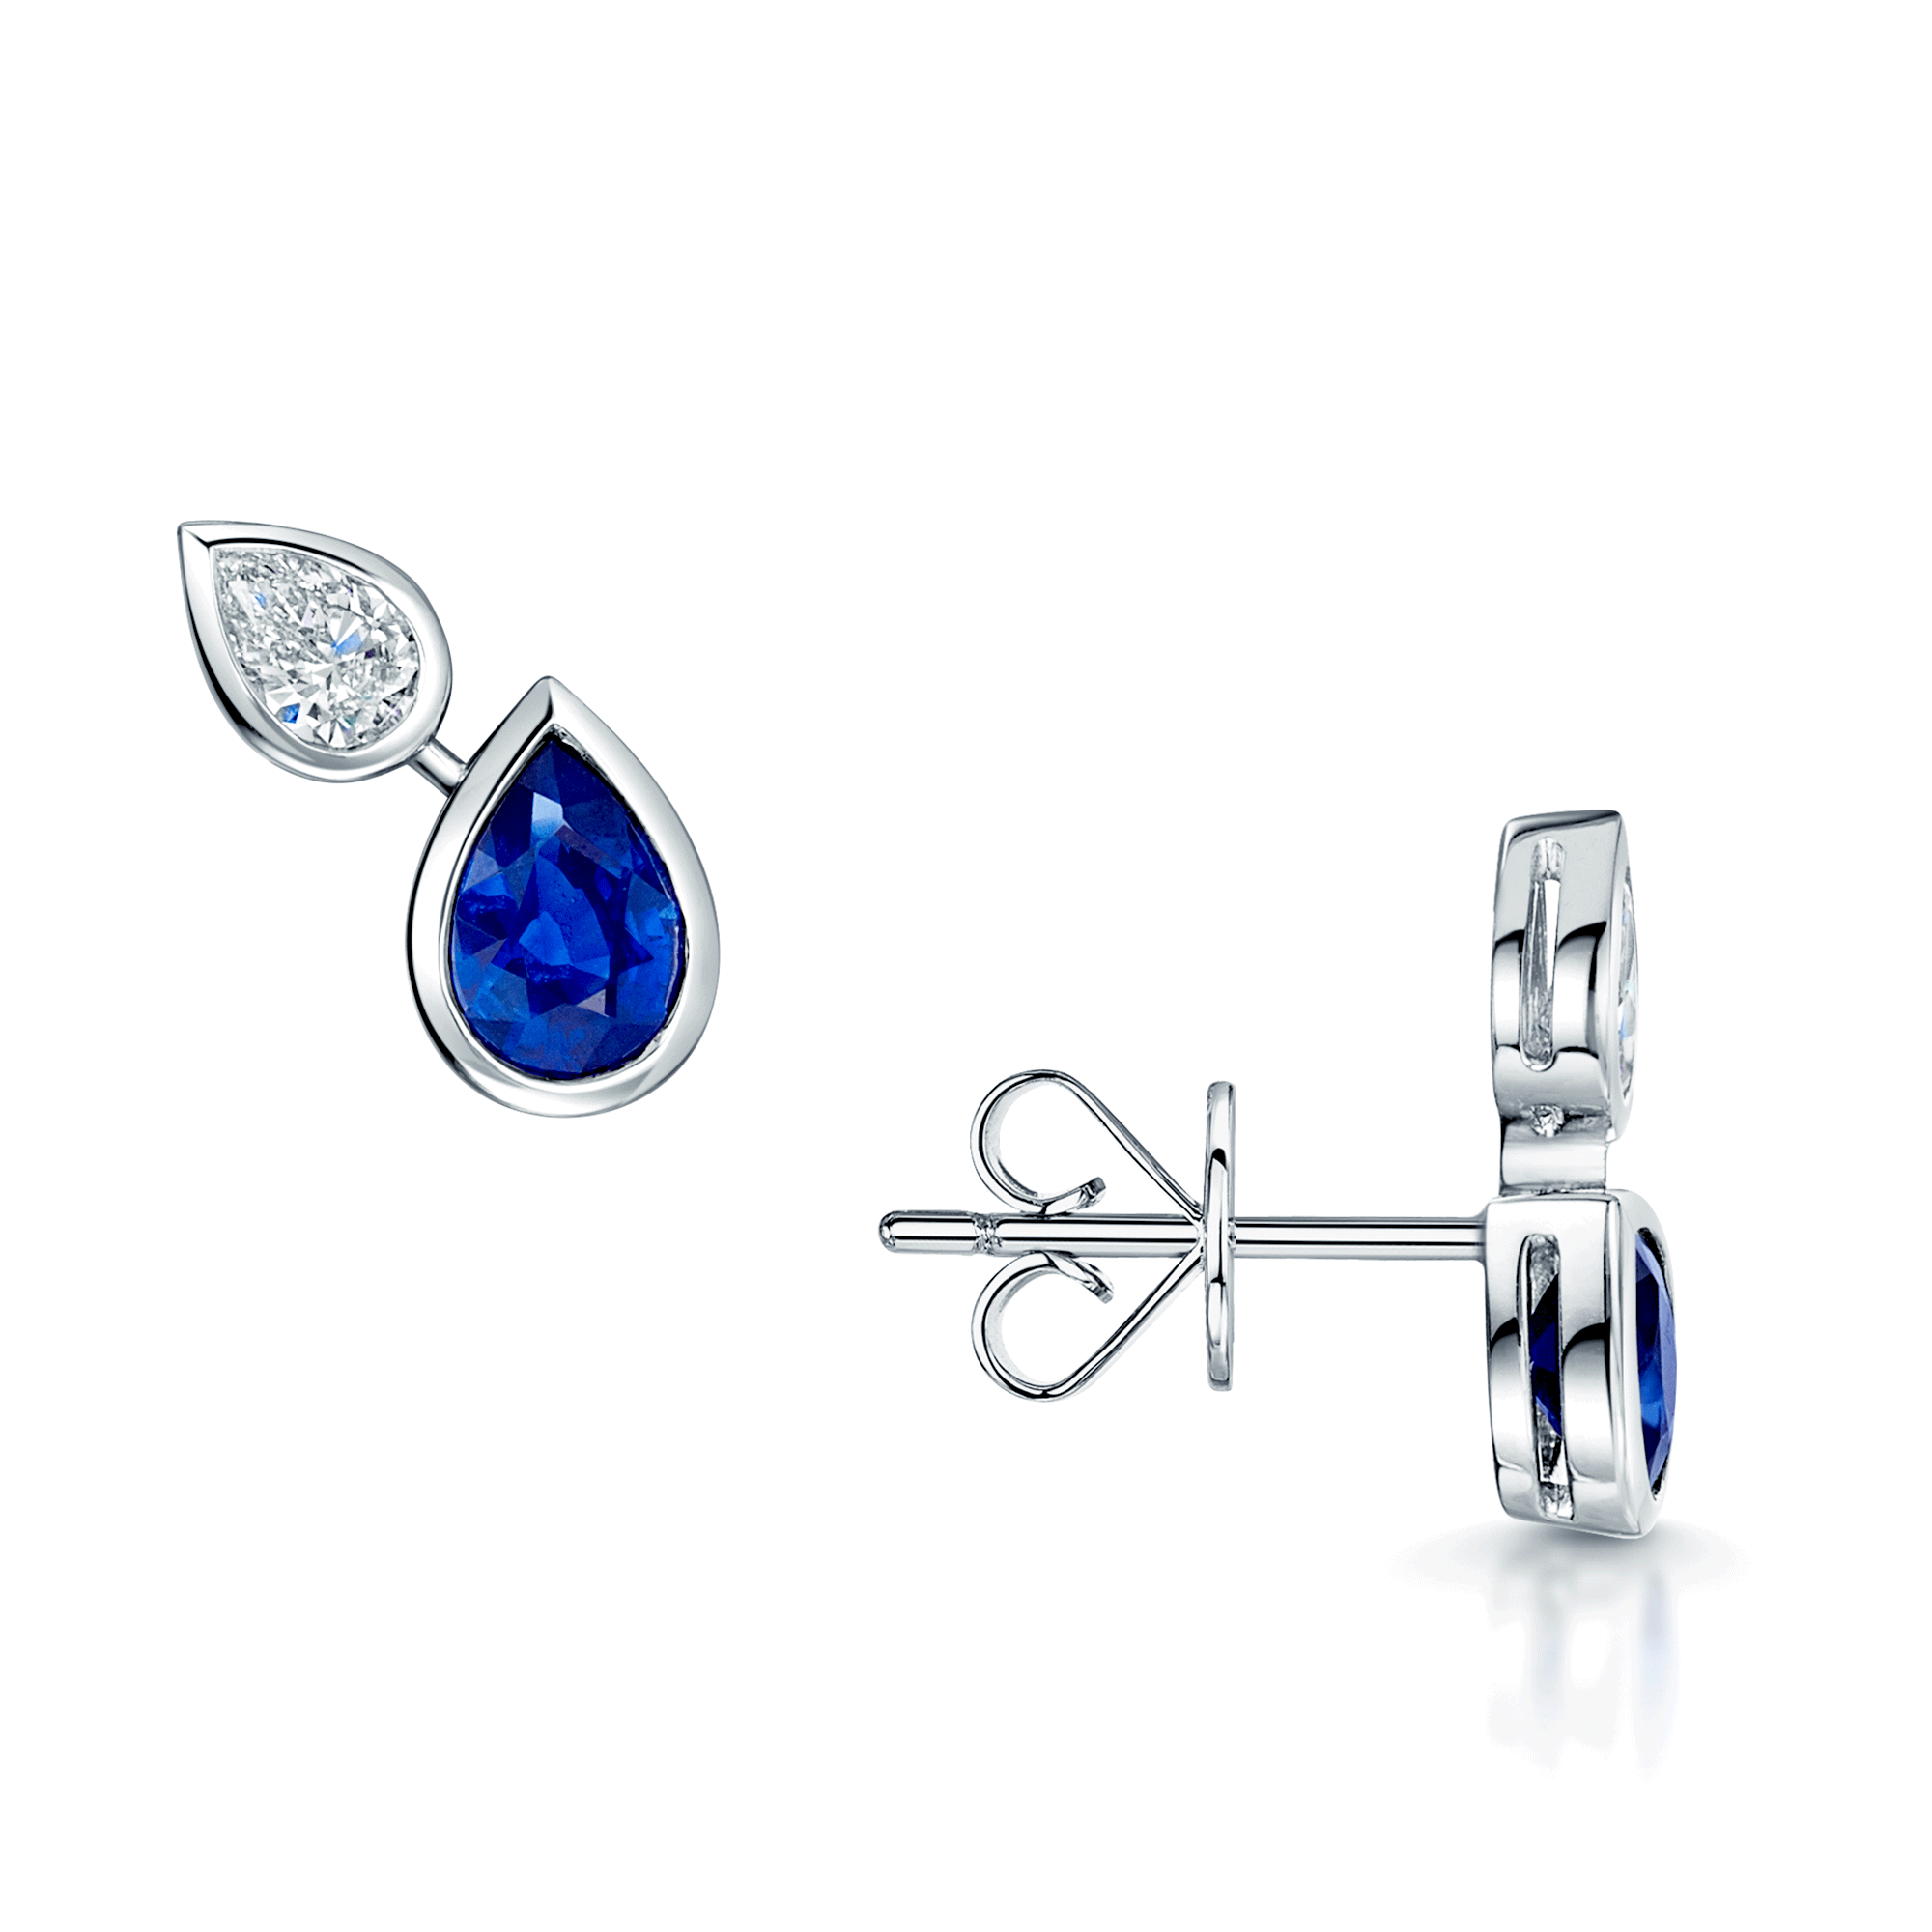 18ct White Gold Pear Cut Sapphire And Diamond Rub Over Set Stud Earrings